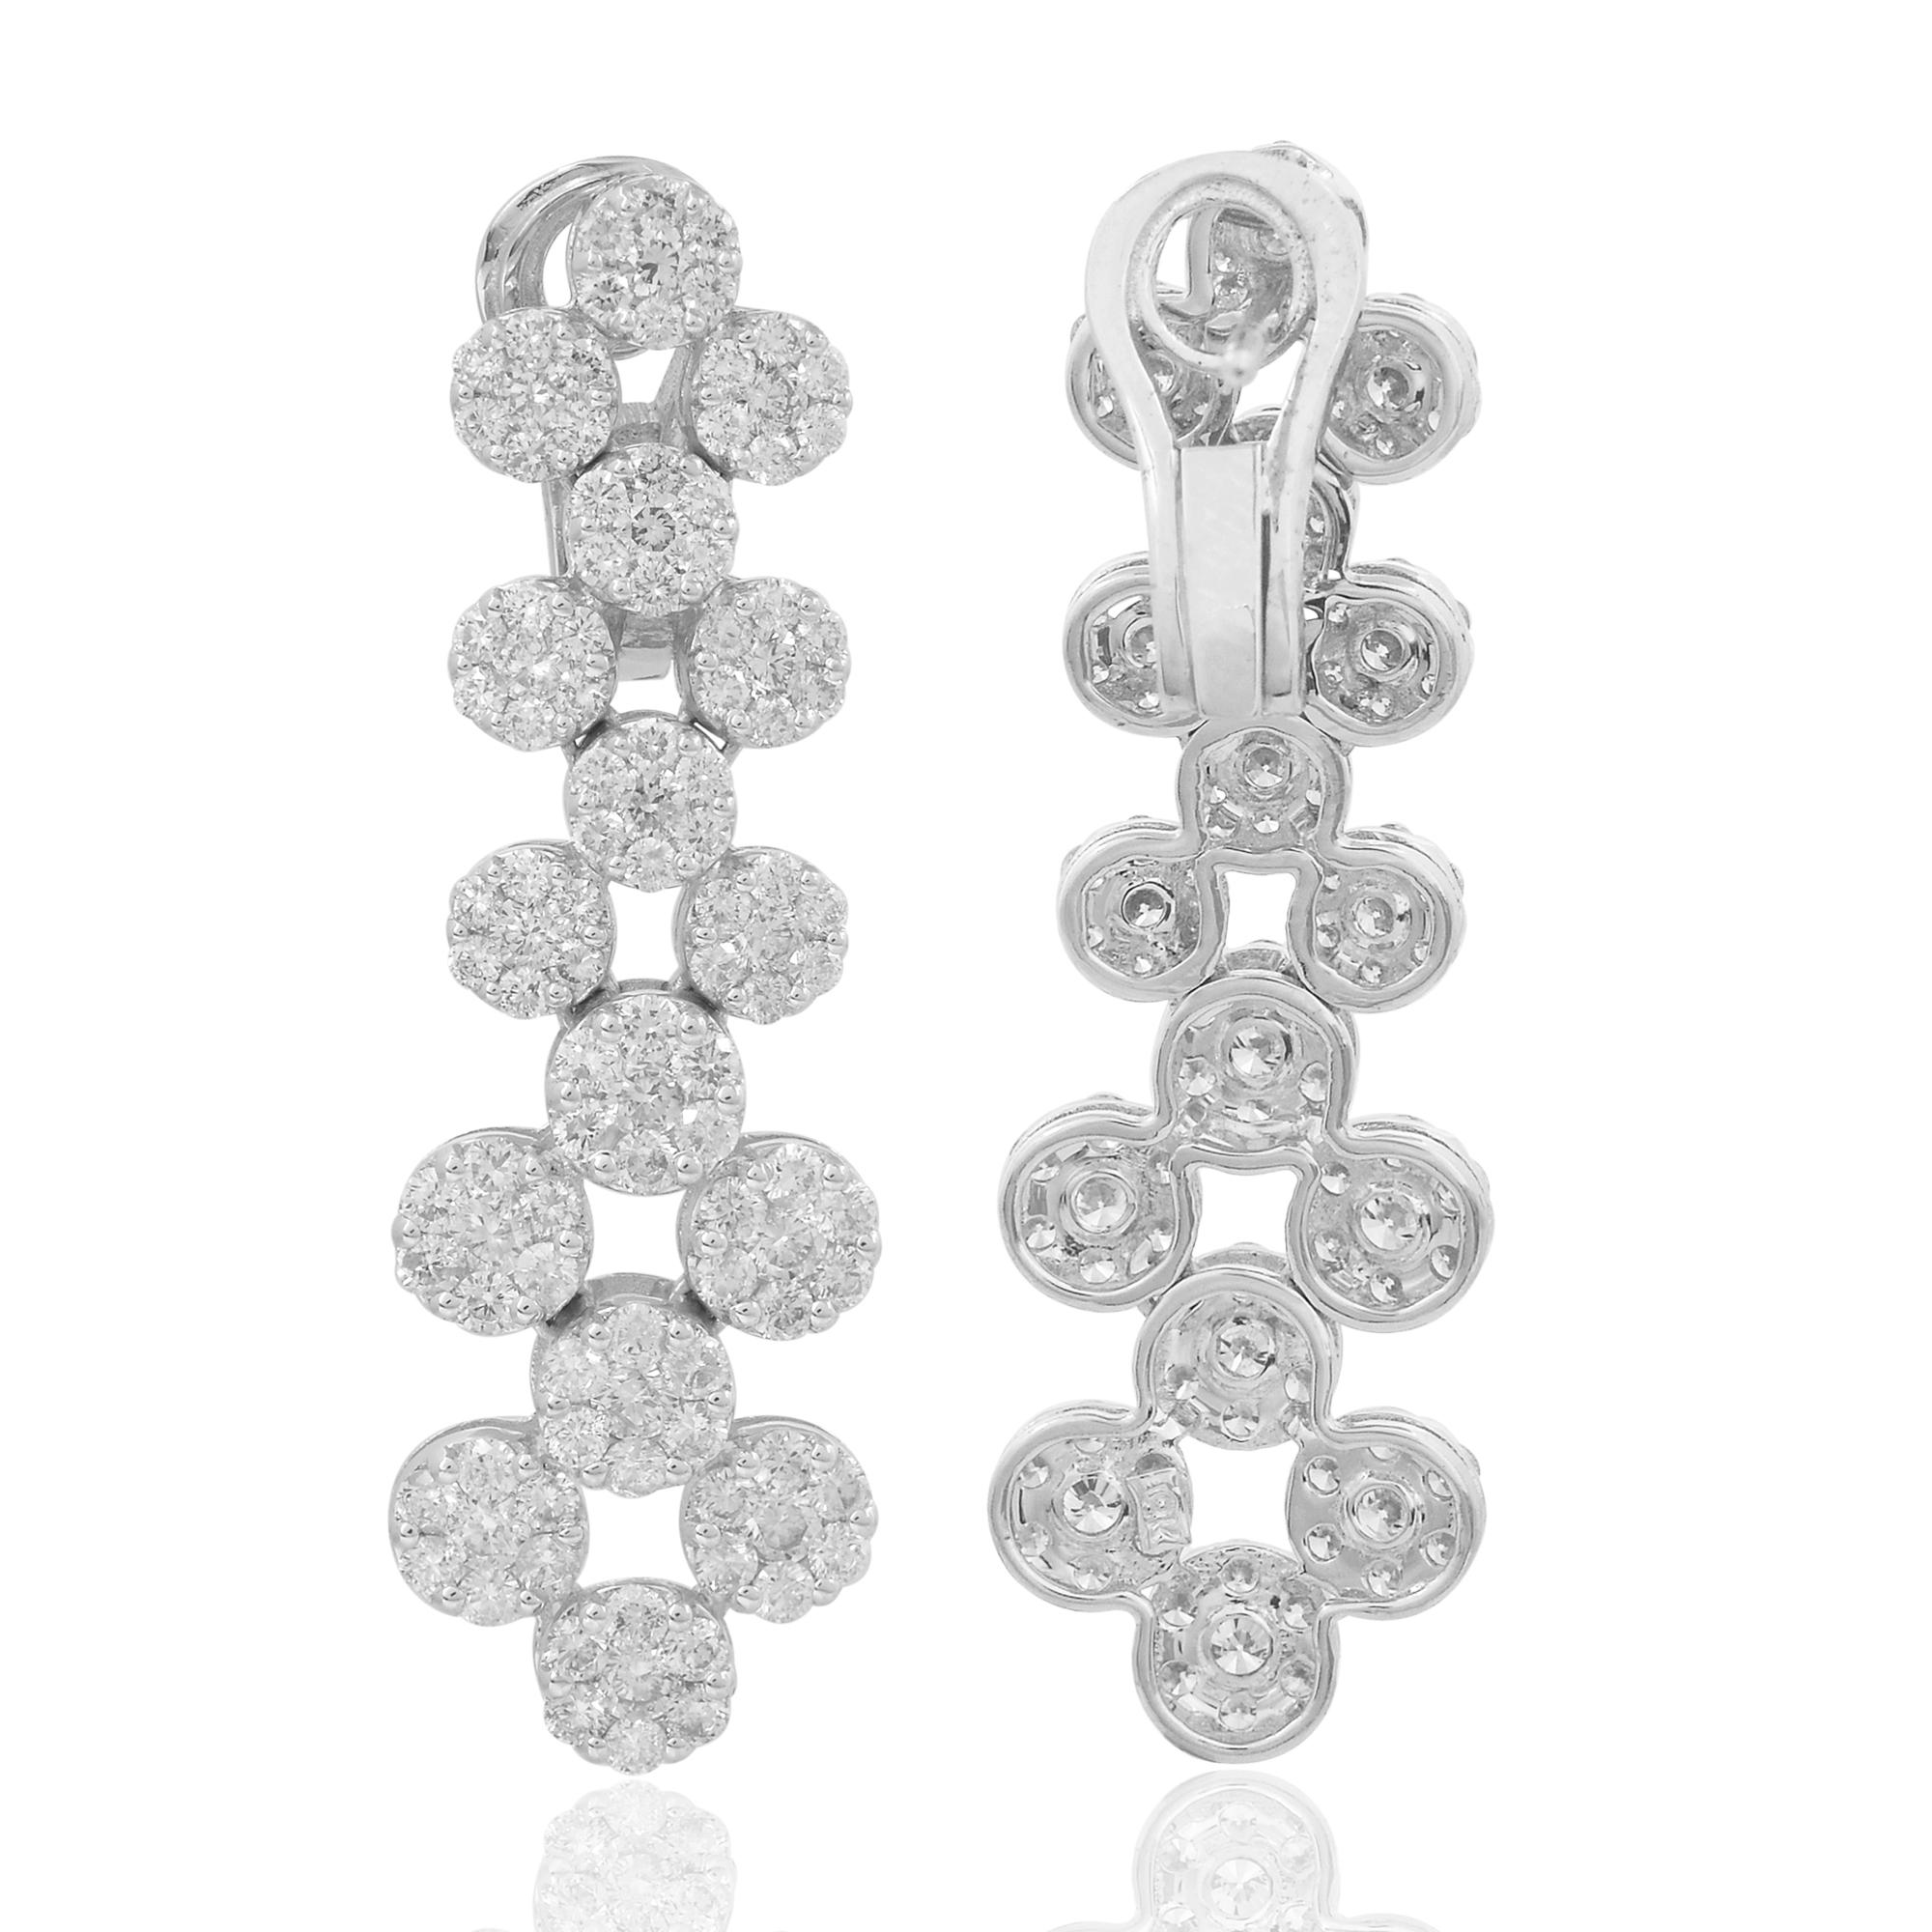 Code :- CN-24444
Gross Wt. :- 11.39 gm
18k Gold Wt. :- 10.37 gm
Diamond Wt. :- 5.10 Ct. ( AVERAGE DIAMOND CLARITY SI1-SI2 & COLOR H-I )
Earrings Size :- 43.03 x 13.22 x 3.70 mm approx.
✦ Sizing
.....................
We can adjust most items to fit